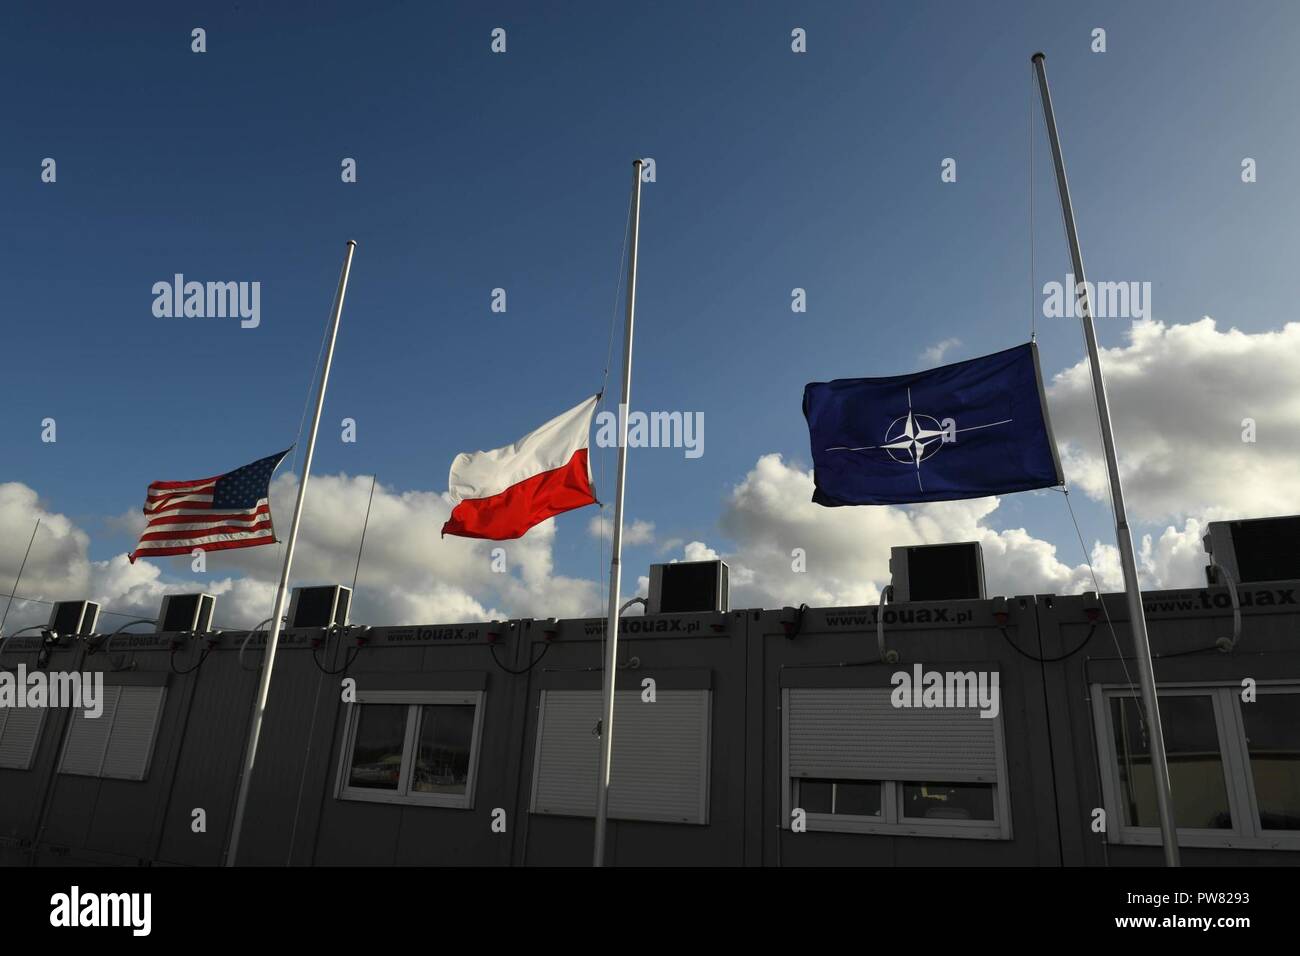 NAVAL SUPPORT FACILITY REDZIKOWO, Poland (Oct. 3, 2017). Naval Support Facility (NSF) Redzikowo flies the United States flag, the flag of Poland, and the flag of the North Atlantic Treaty Organization (NATO) at half-staff until sunset on Oct. 6 as a remark of respect for the victims of a mass shooting in Las Vegas, Nevada, Oct. 1. NSF Redzikowo is the Navy’s newest installation, and the first U.S. installation in Poland. Its operations enable the responsiveness of U.S. and allied forces in support of Navy Region Europe, Africa, Southwest Asia’s (EURAFSWA) mission to provide services to the Fle Stock Photo